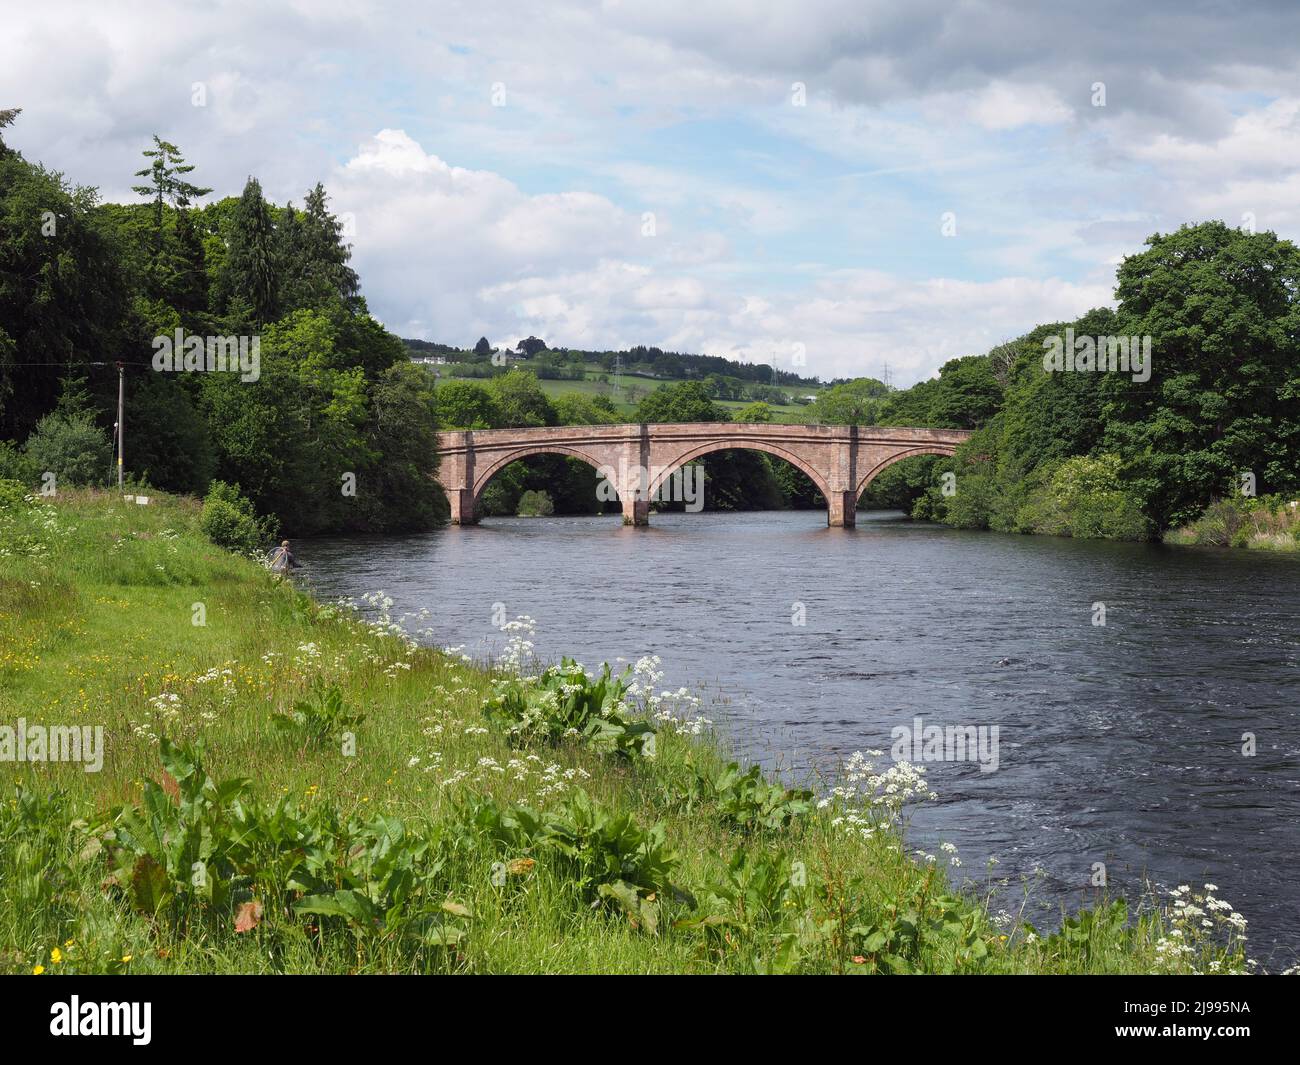 A fisherman on the grass banks of the River Beauly. The stone built Lovat Bridge (1811-1814) which carries the A862 road to Inverness. Stock Photo